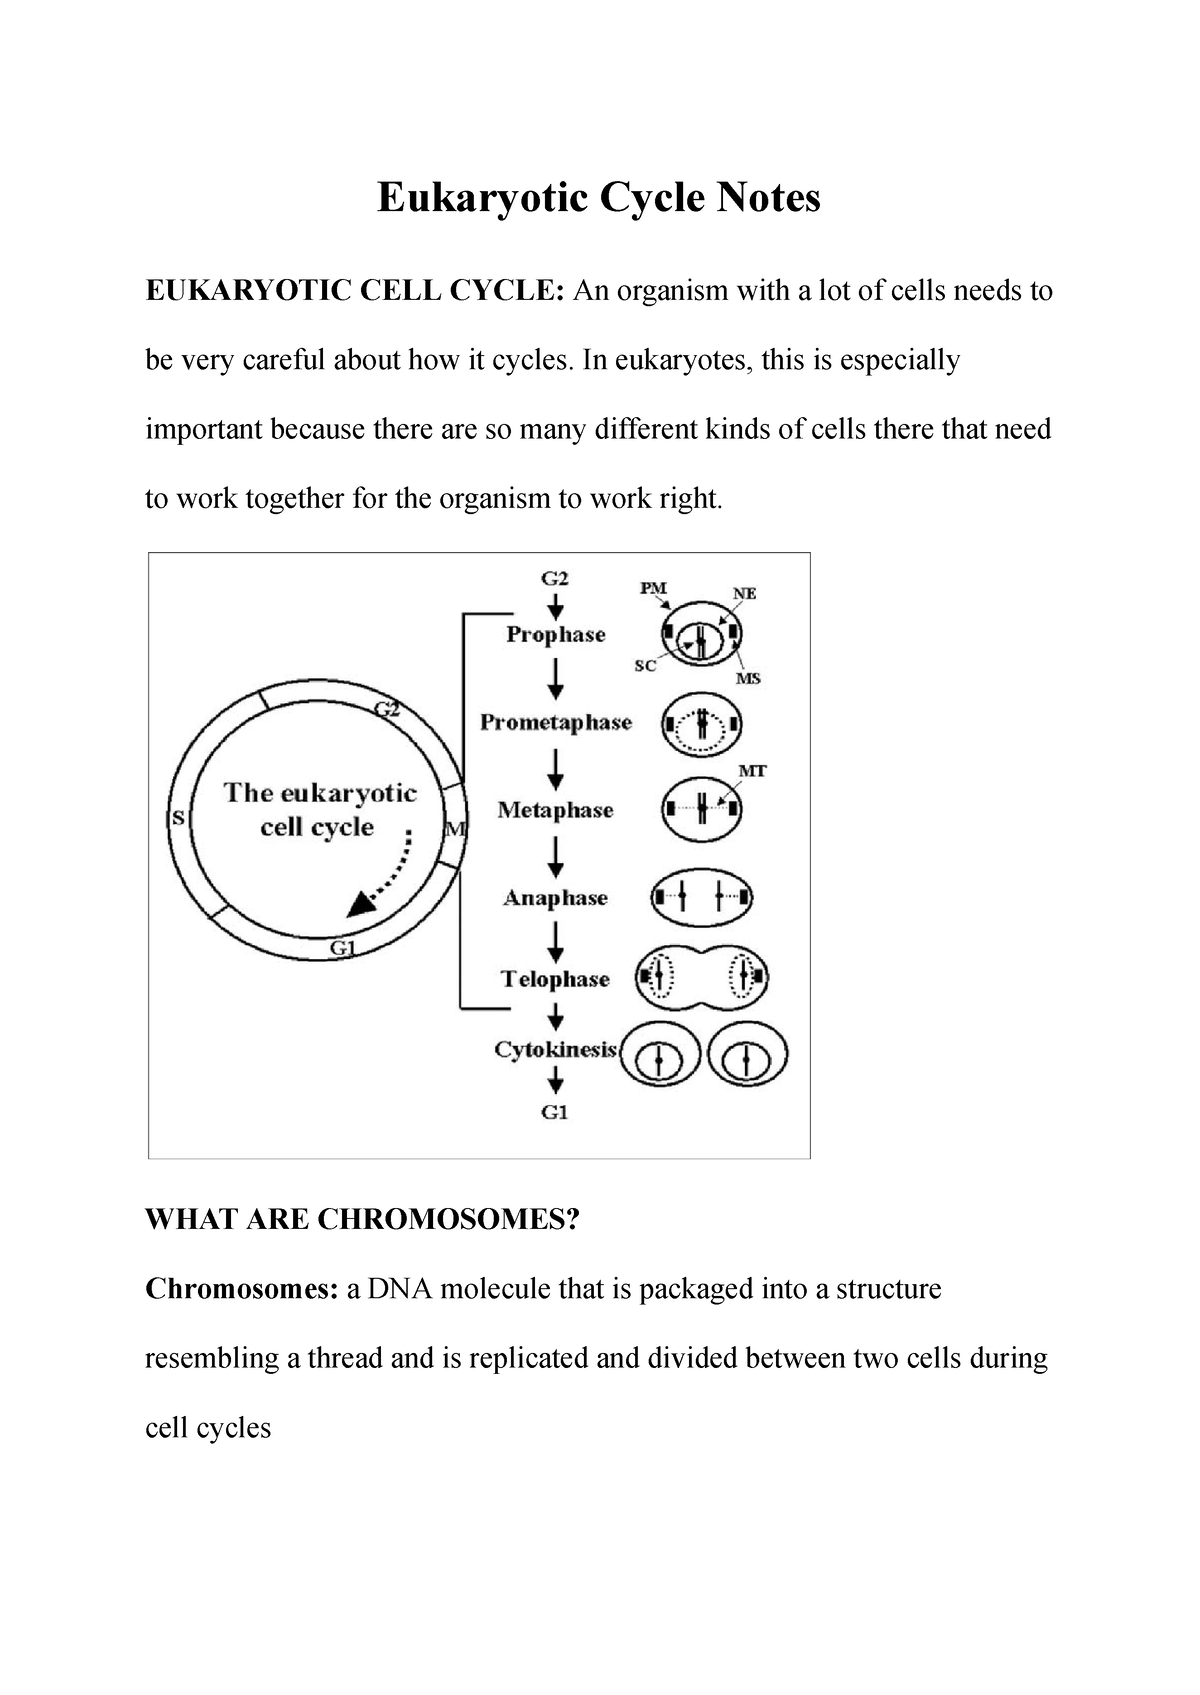 eukaryotic-cycle-notes-eukaryotic-cycle-notes-eukaryotic-cell-cycle